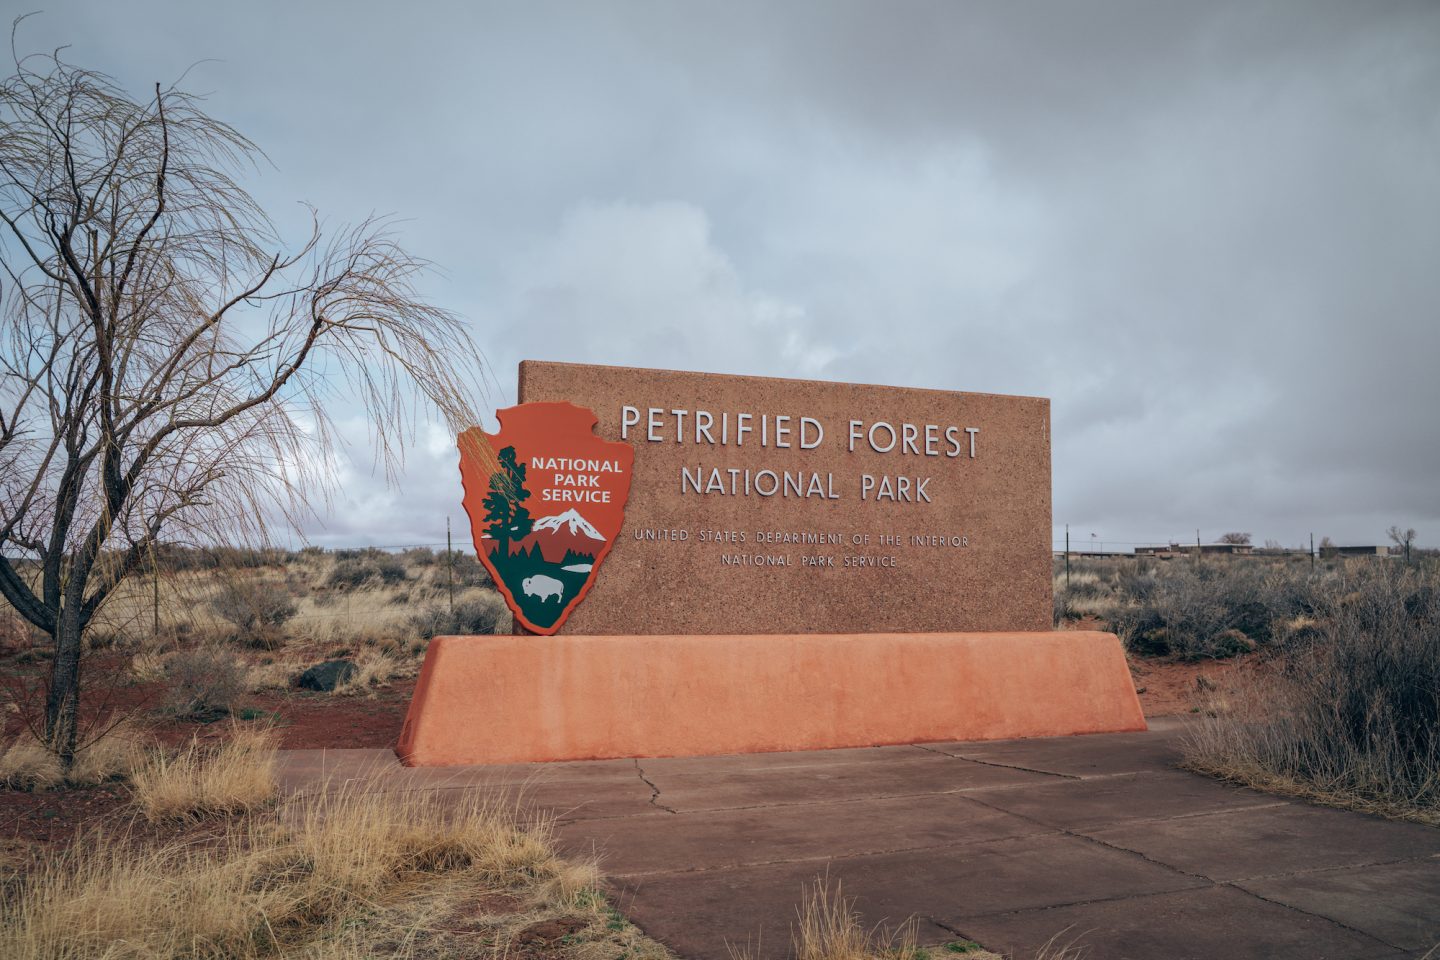 Entrance of Petrified Forest National Park